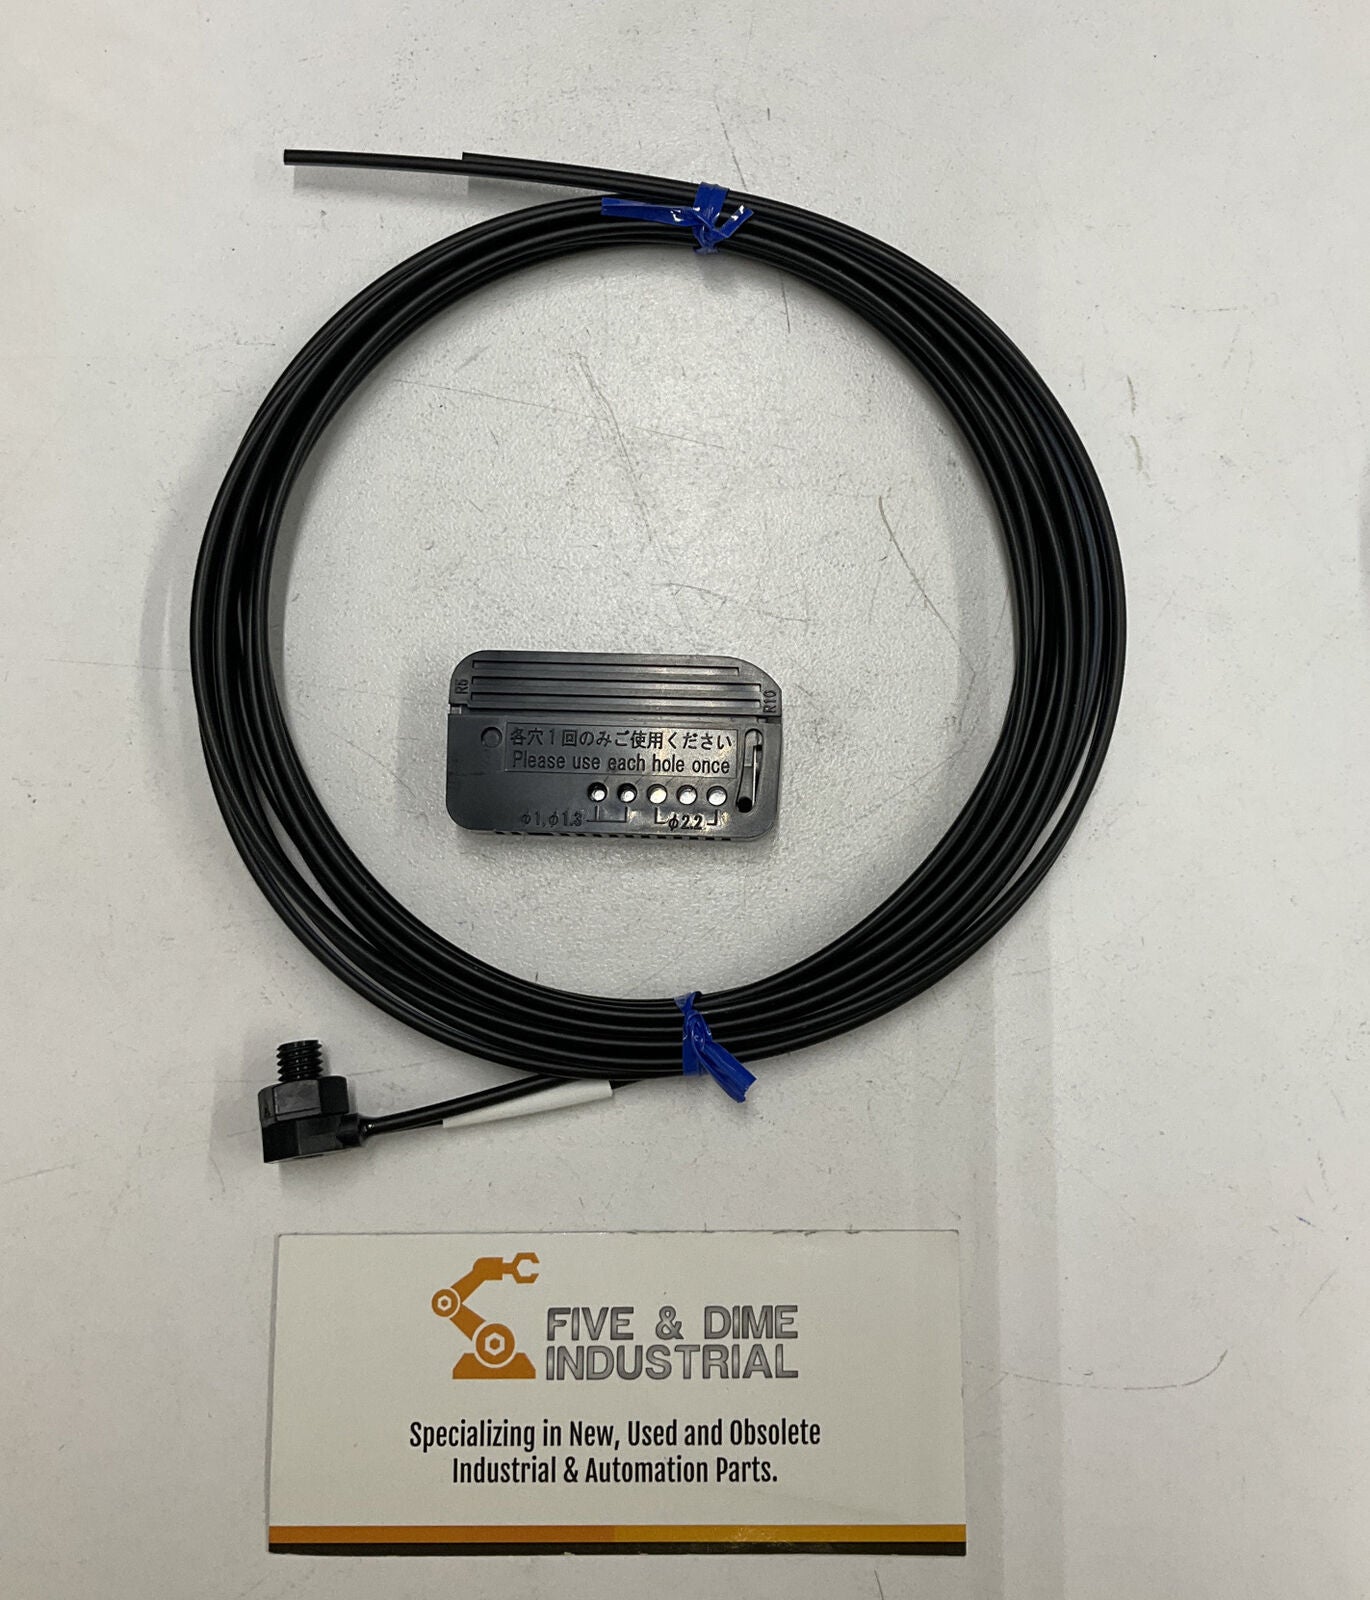 Optex NF25-D Fiber Optic Cable & Cutter 90 Degree M6 2 Meters (CL205)